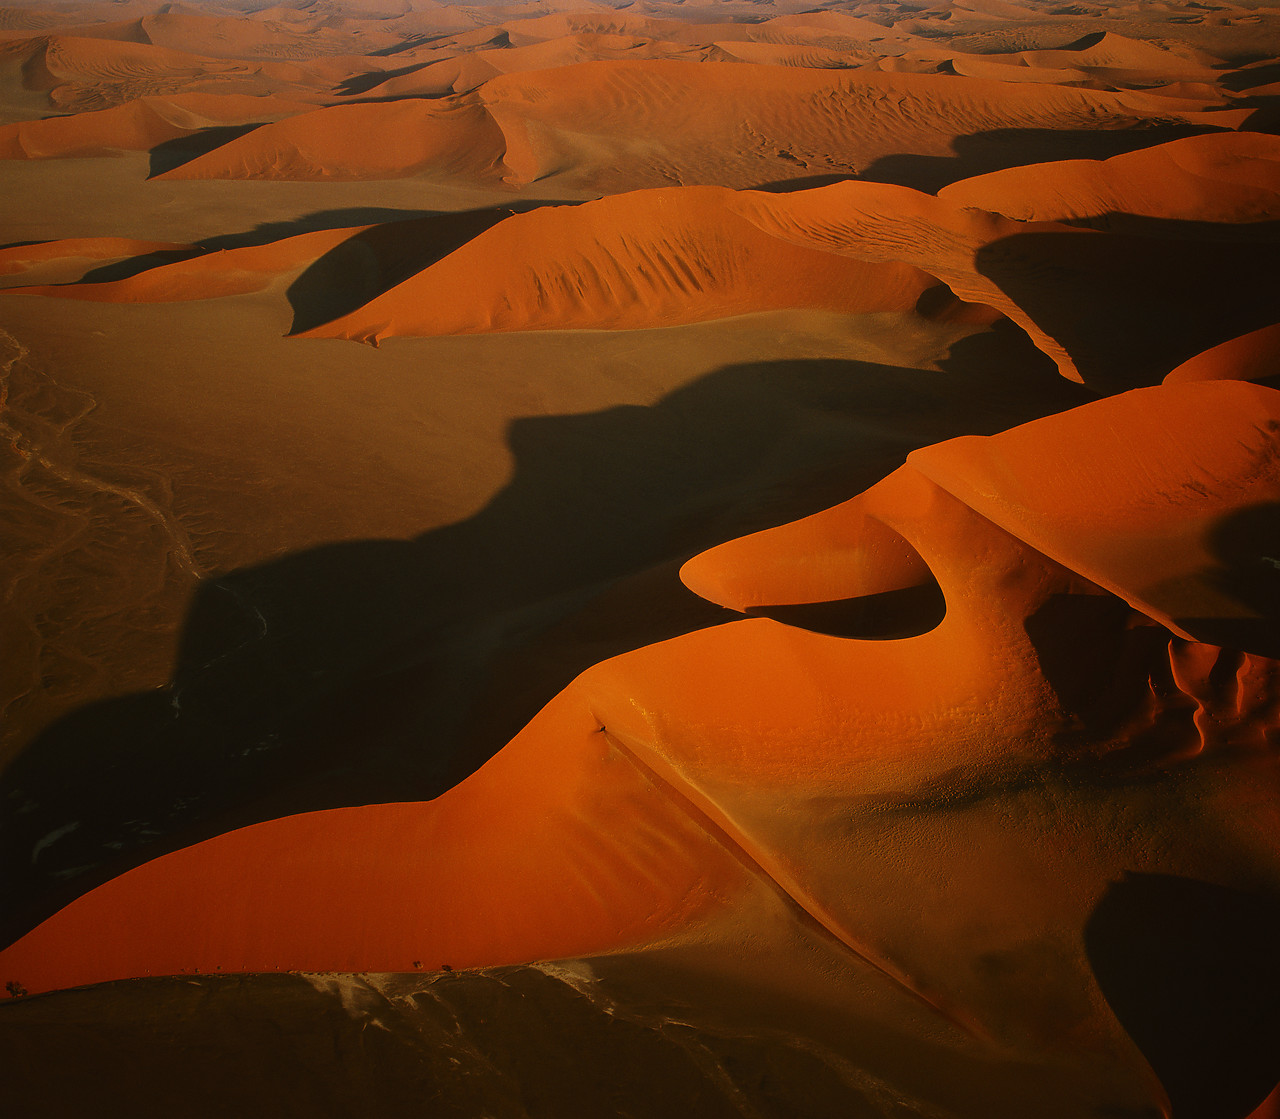 #010027-1 - Aerial View over Sand Dunes, Sossusvlei, Namibia, Africa